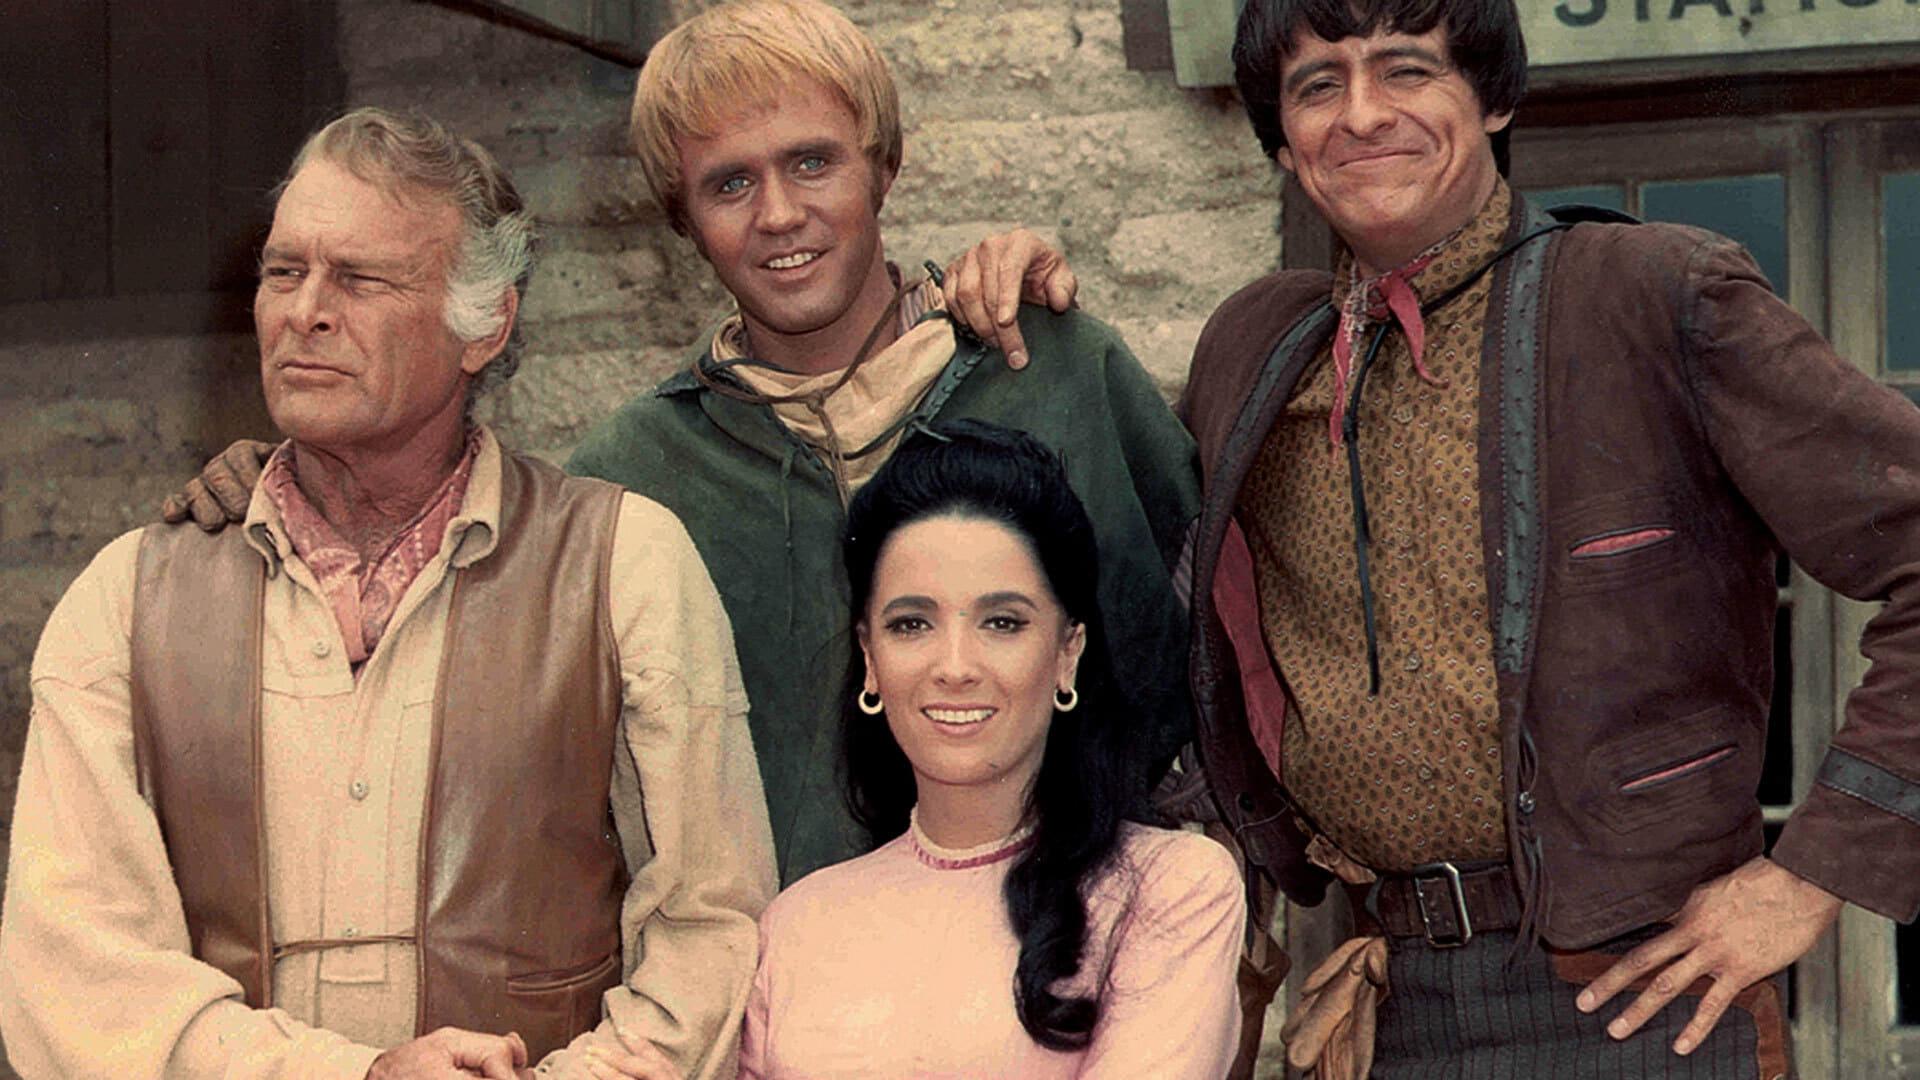 The High Chaparral backdrop